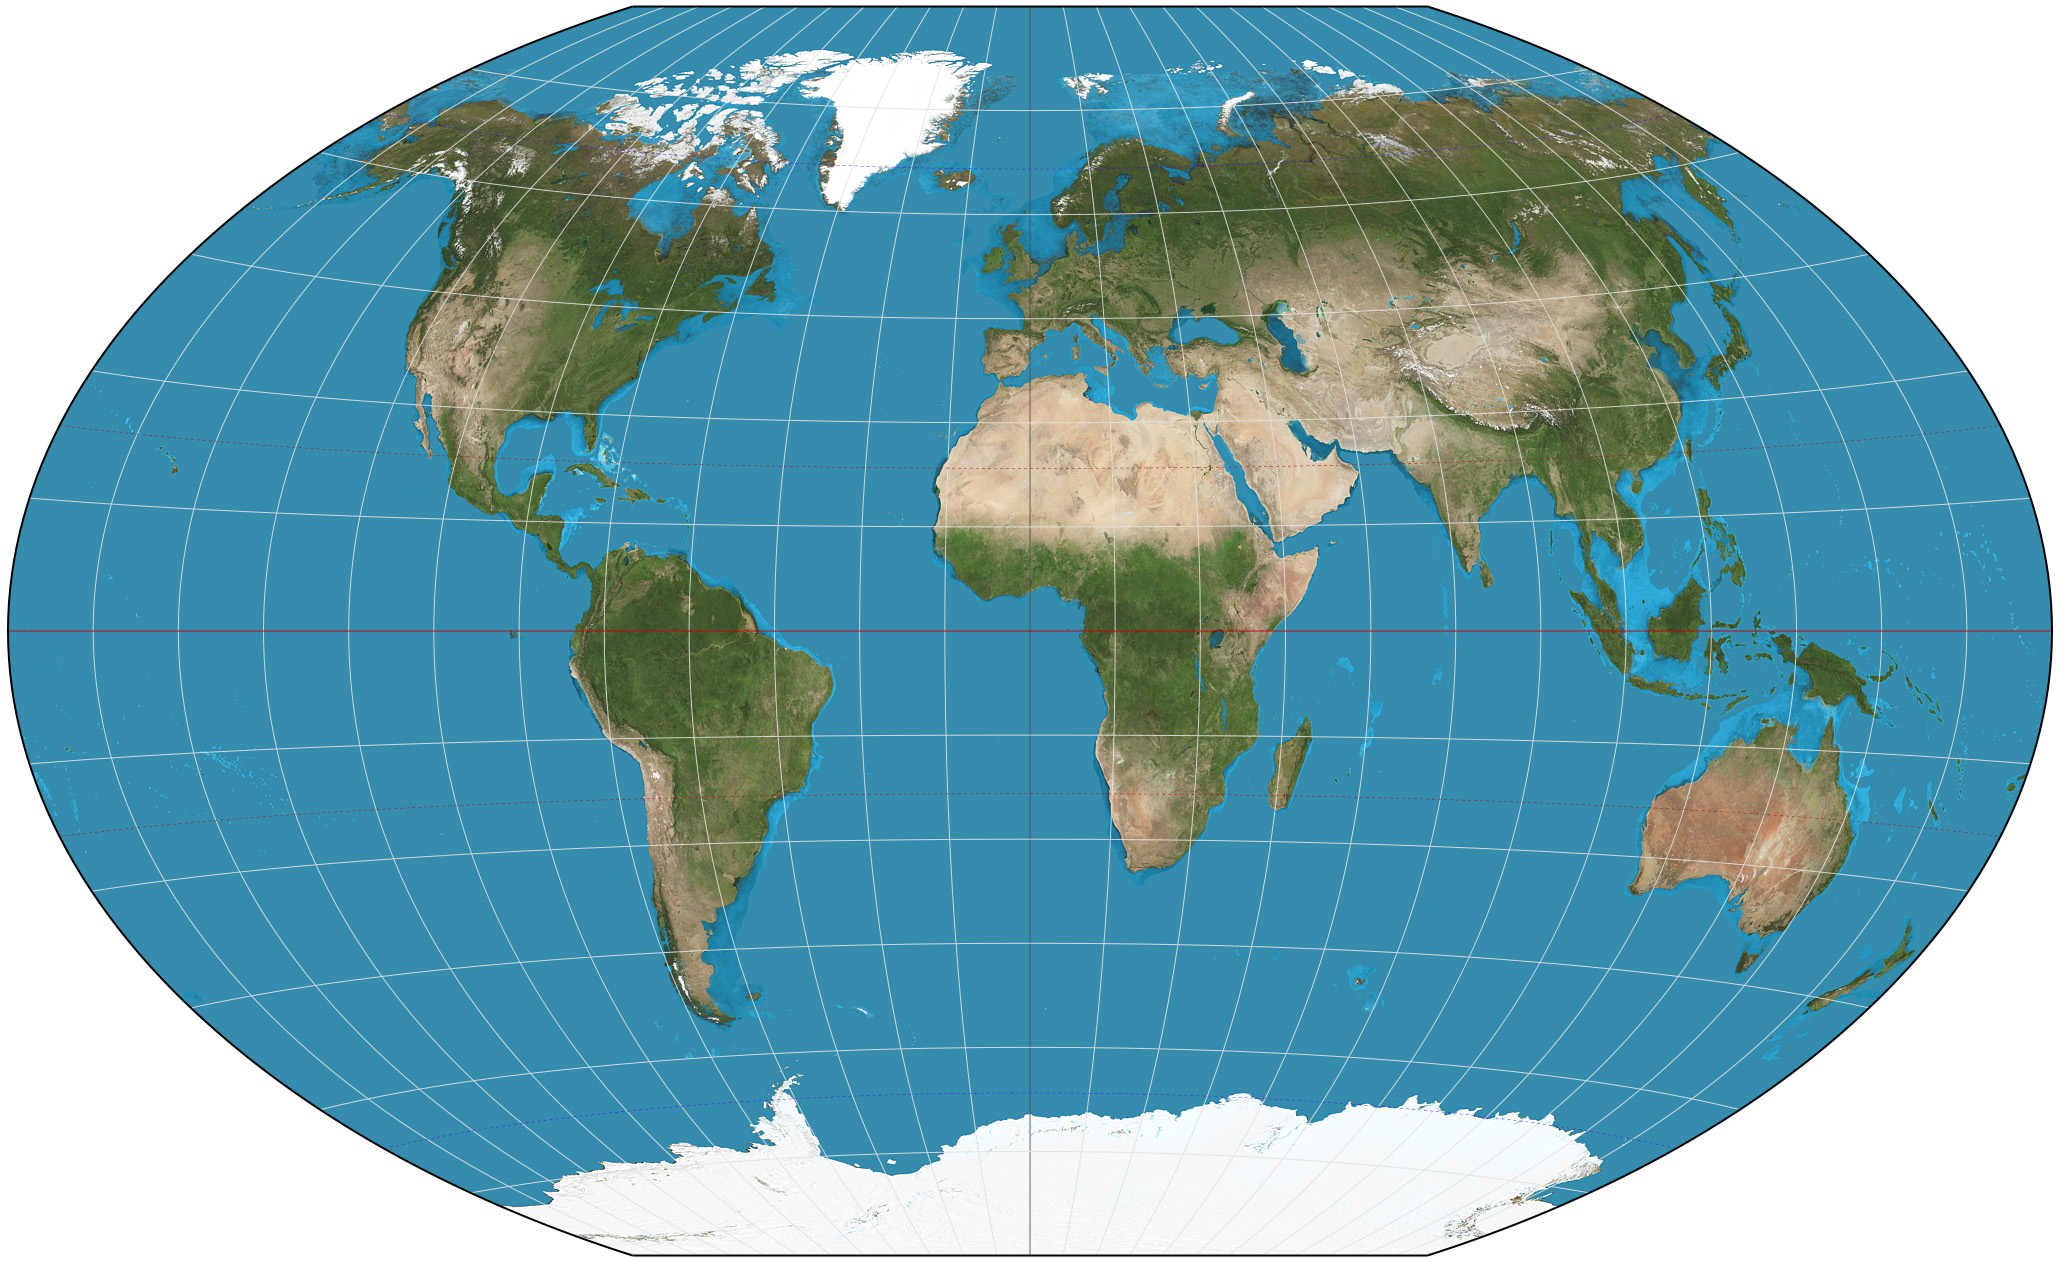 World map with different regions highlighted